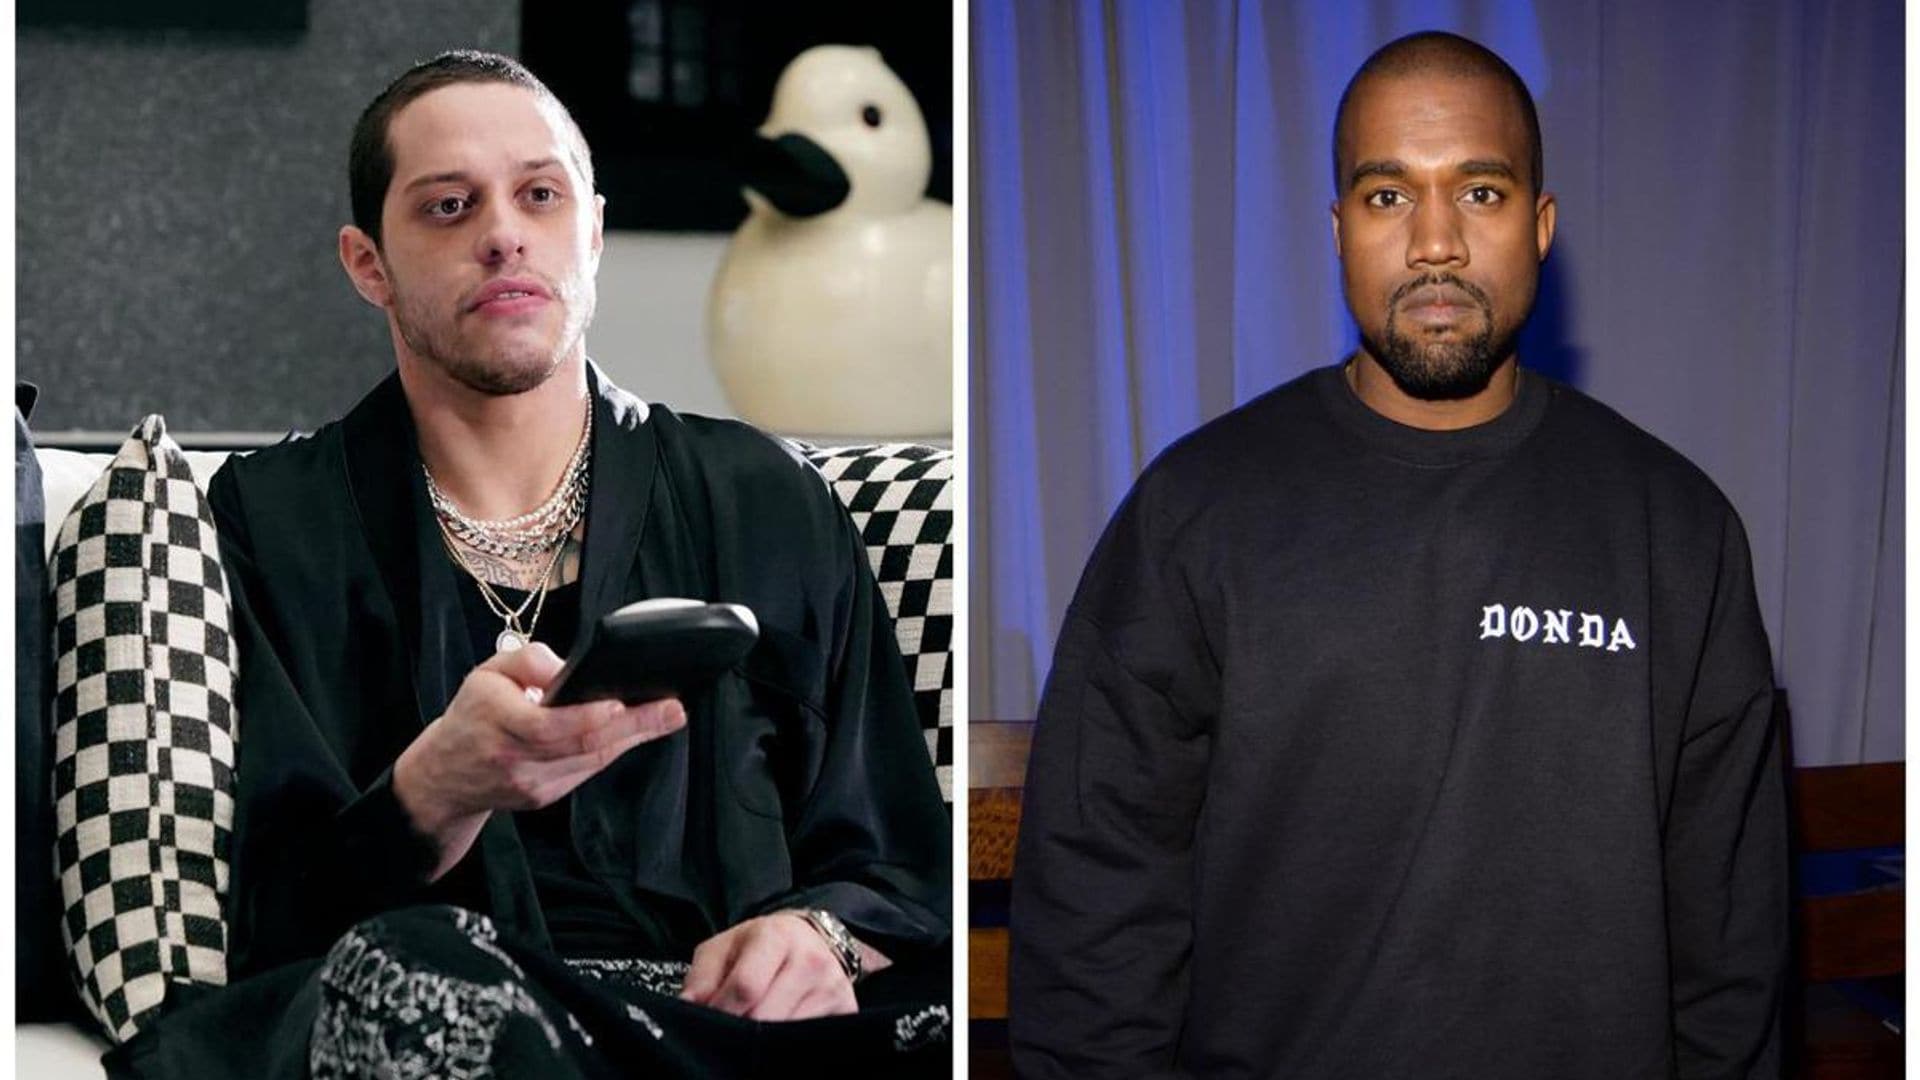 Pete Davidson is reportedly seeing a therapist due to Kanye West’s online bullying and harassment behavior